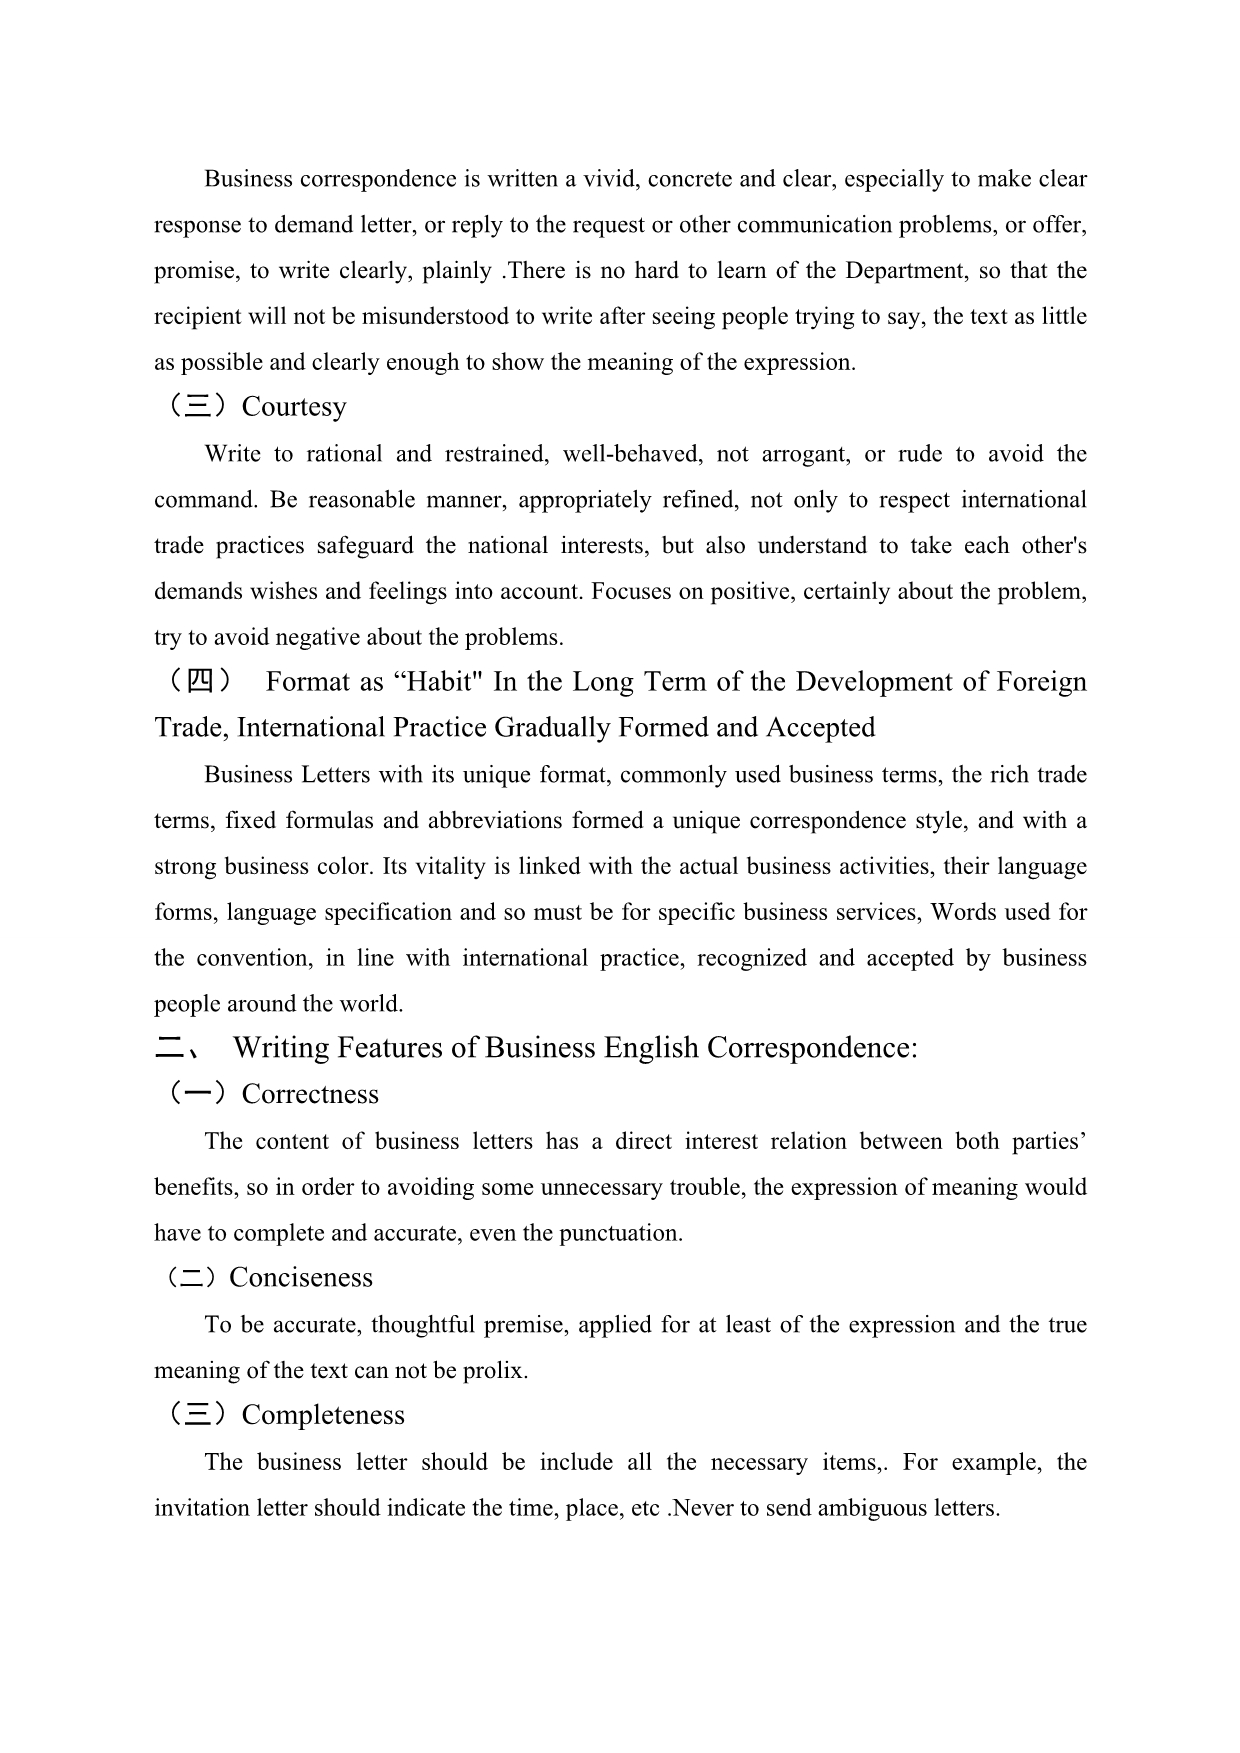 Business English Correspondence in the Role of Foreign Trade 英语专业毕业论文.doc_第4页